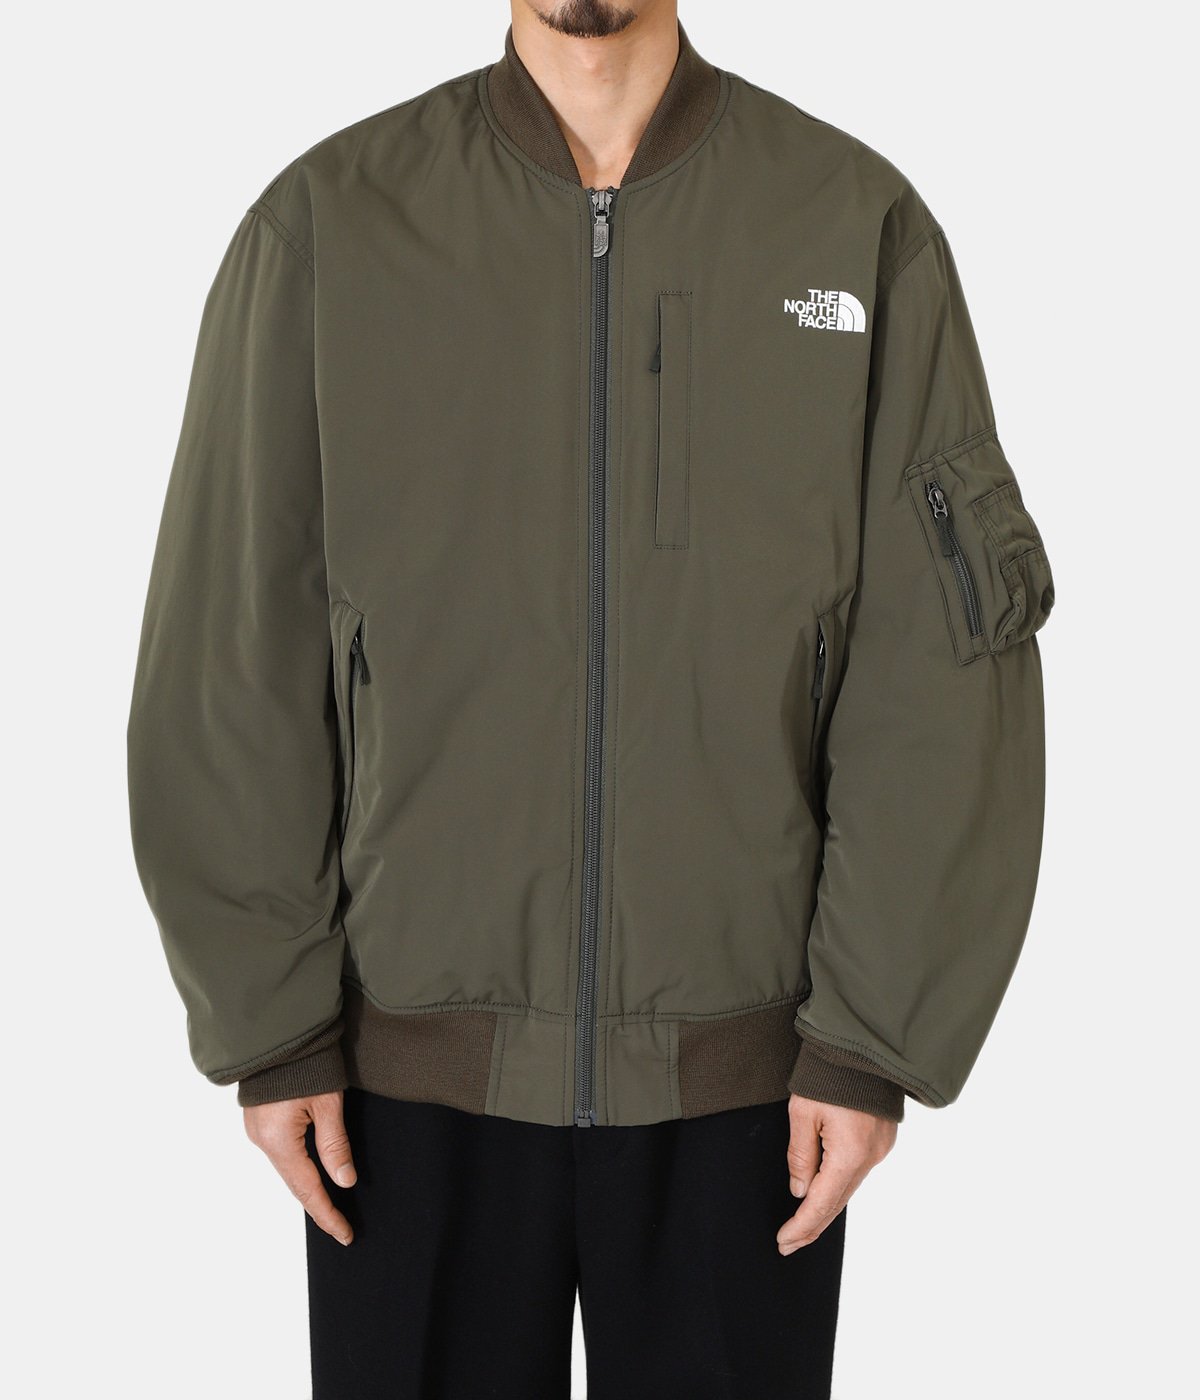 Insulation Bomber Jacket | THE NORTH FACE(ザ ノースフェイス 